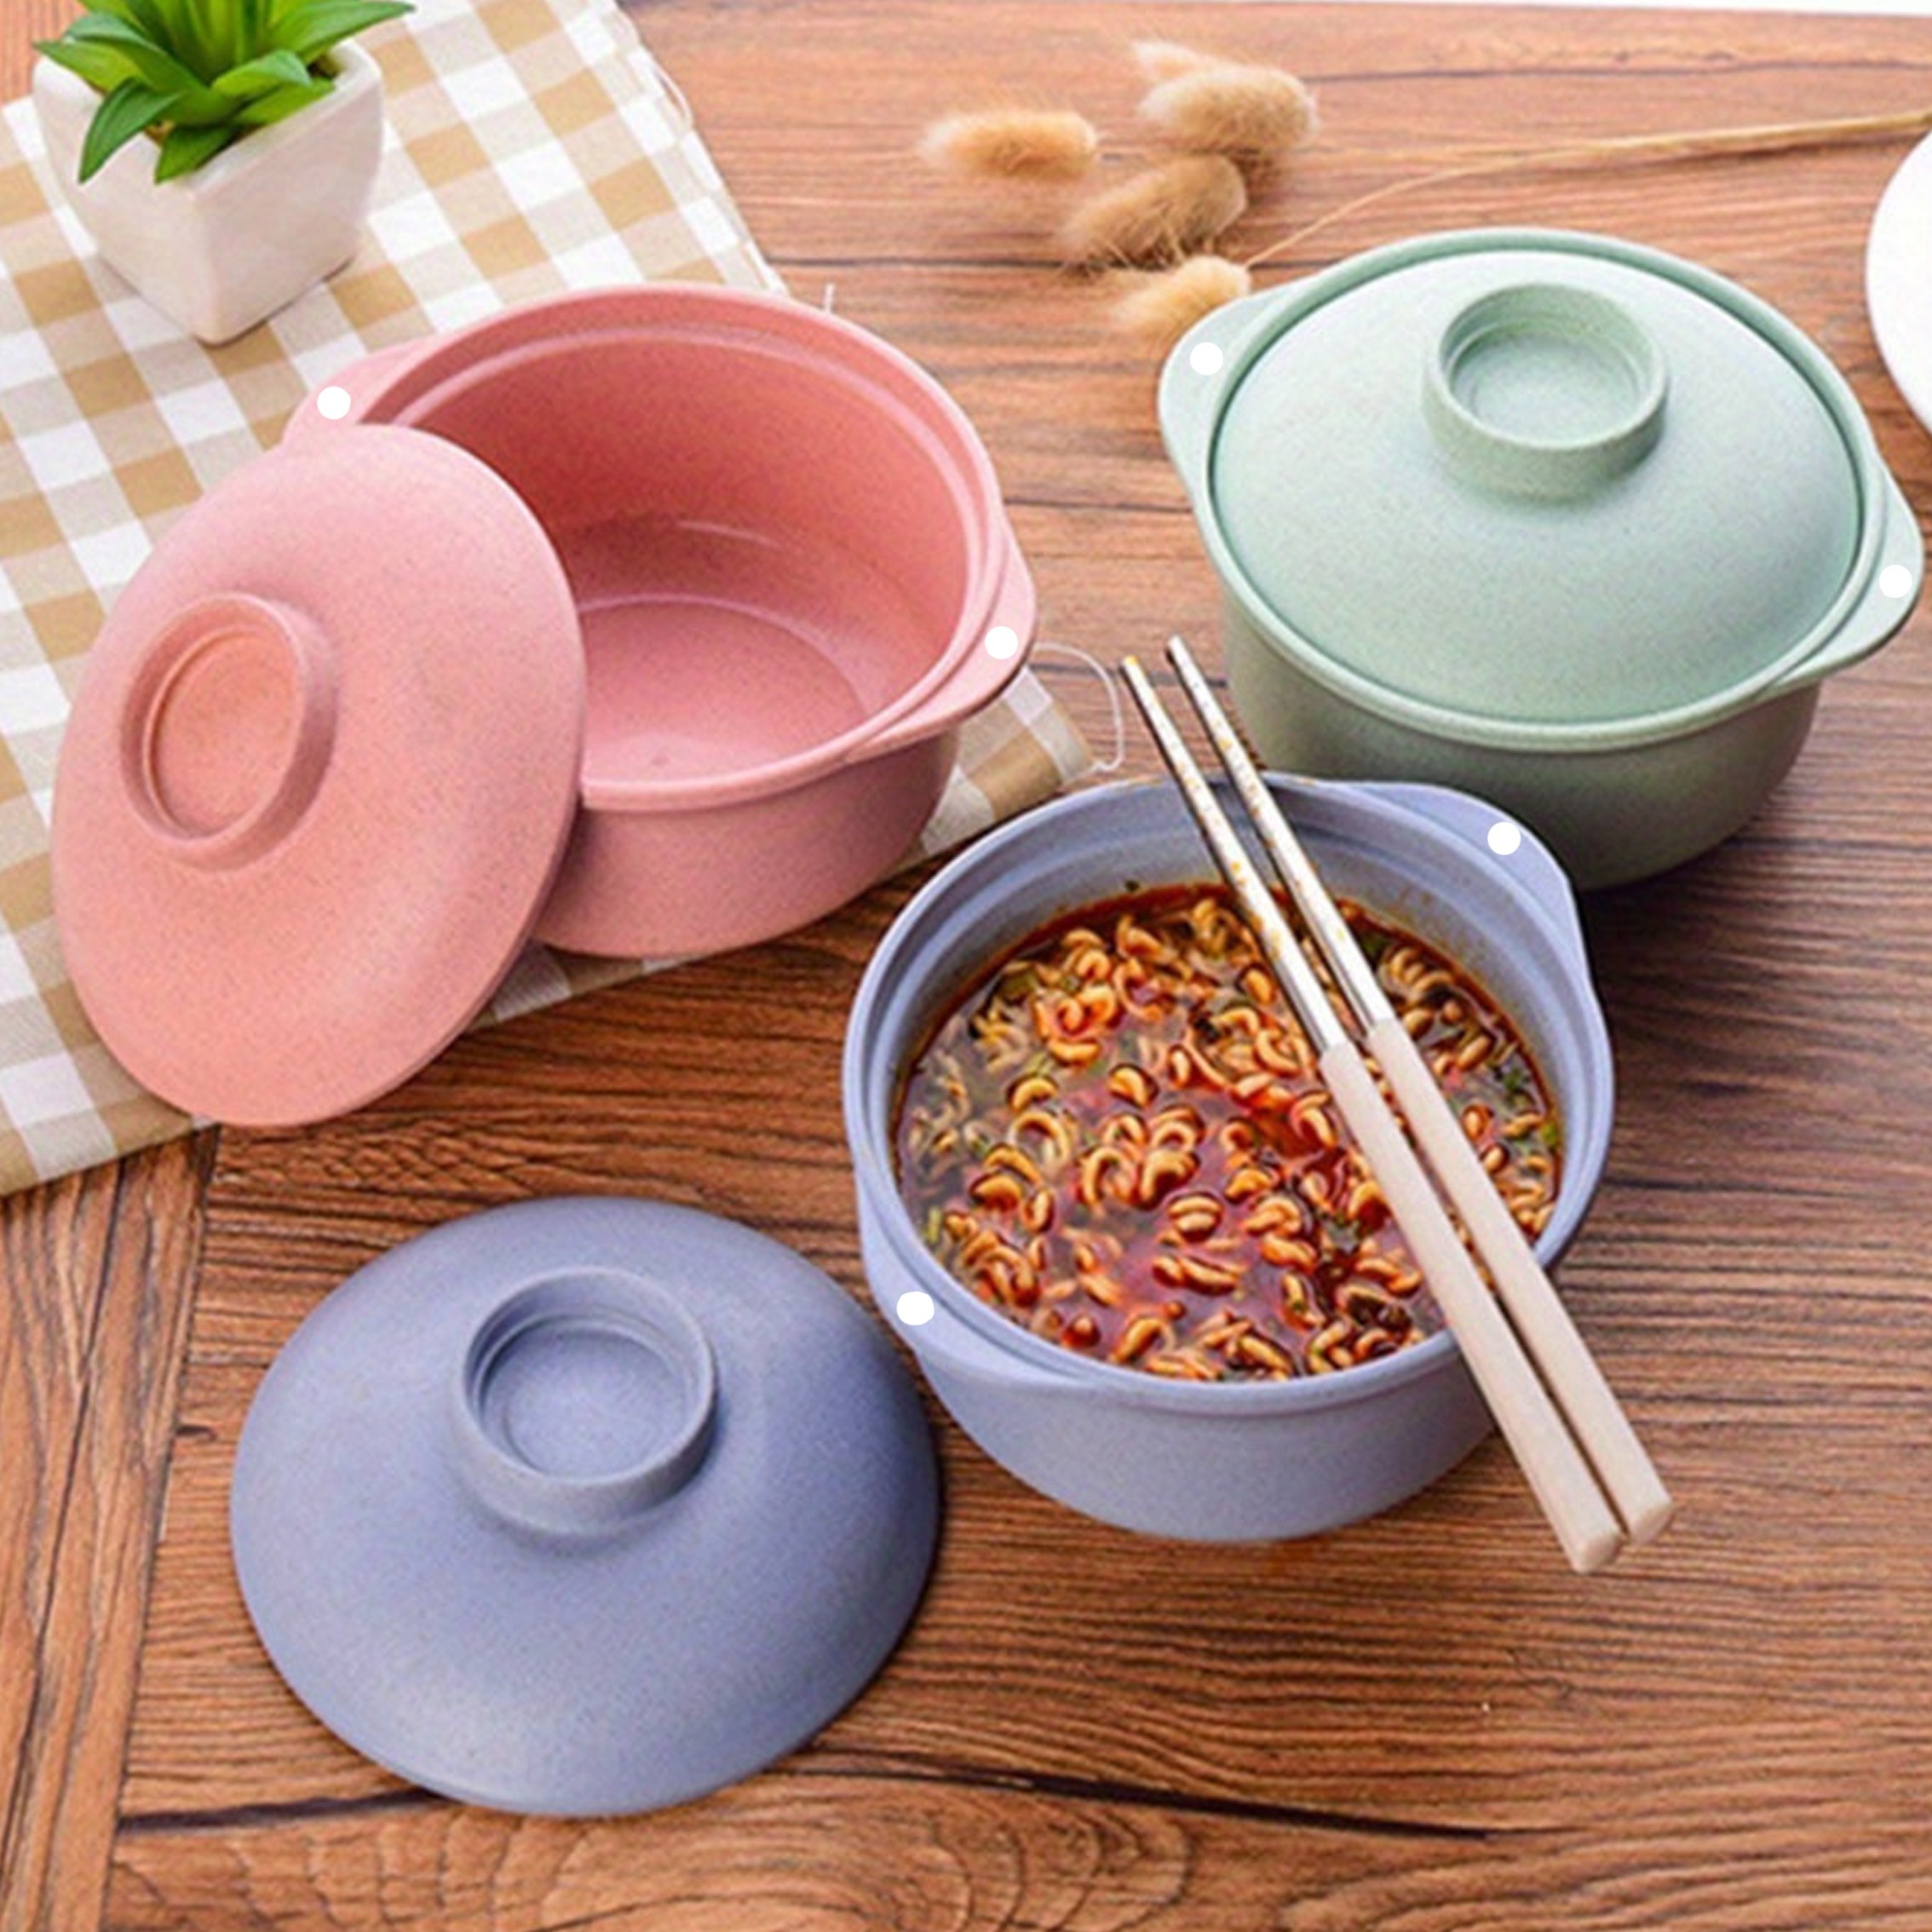 

easy-clean" Japanese-inspired Instant Noodle Bowls With Lids - Perfect For Soup, Rice & Healthy Meals - Durable Plastic Food Containers For Students & Parties